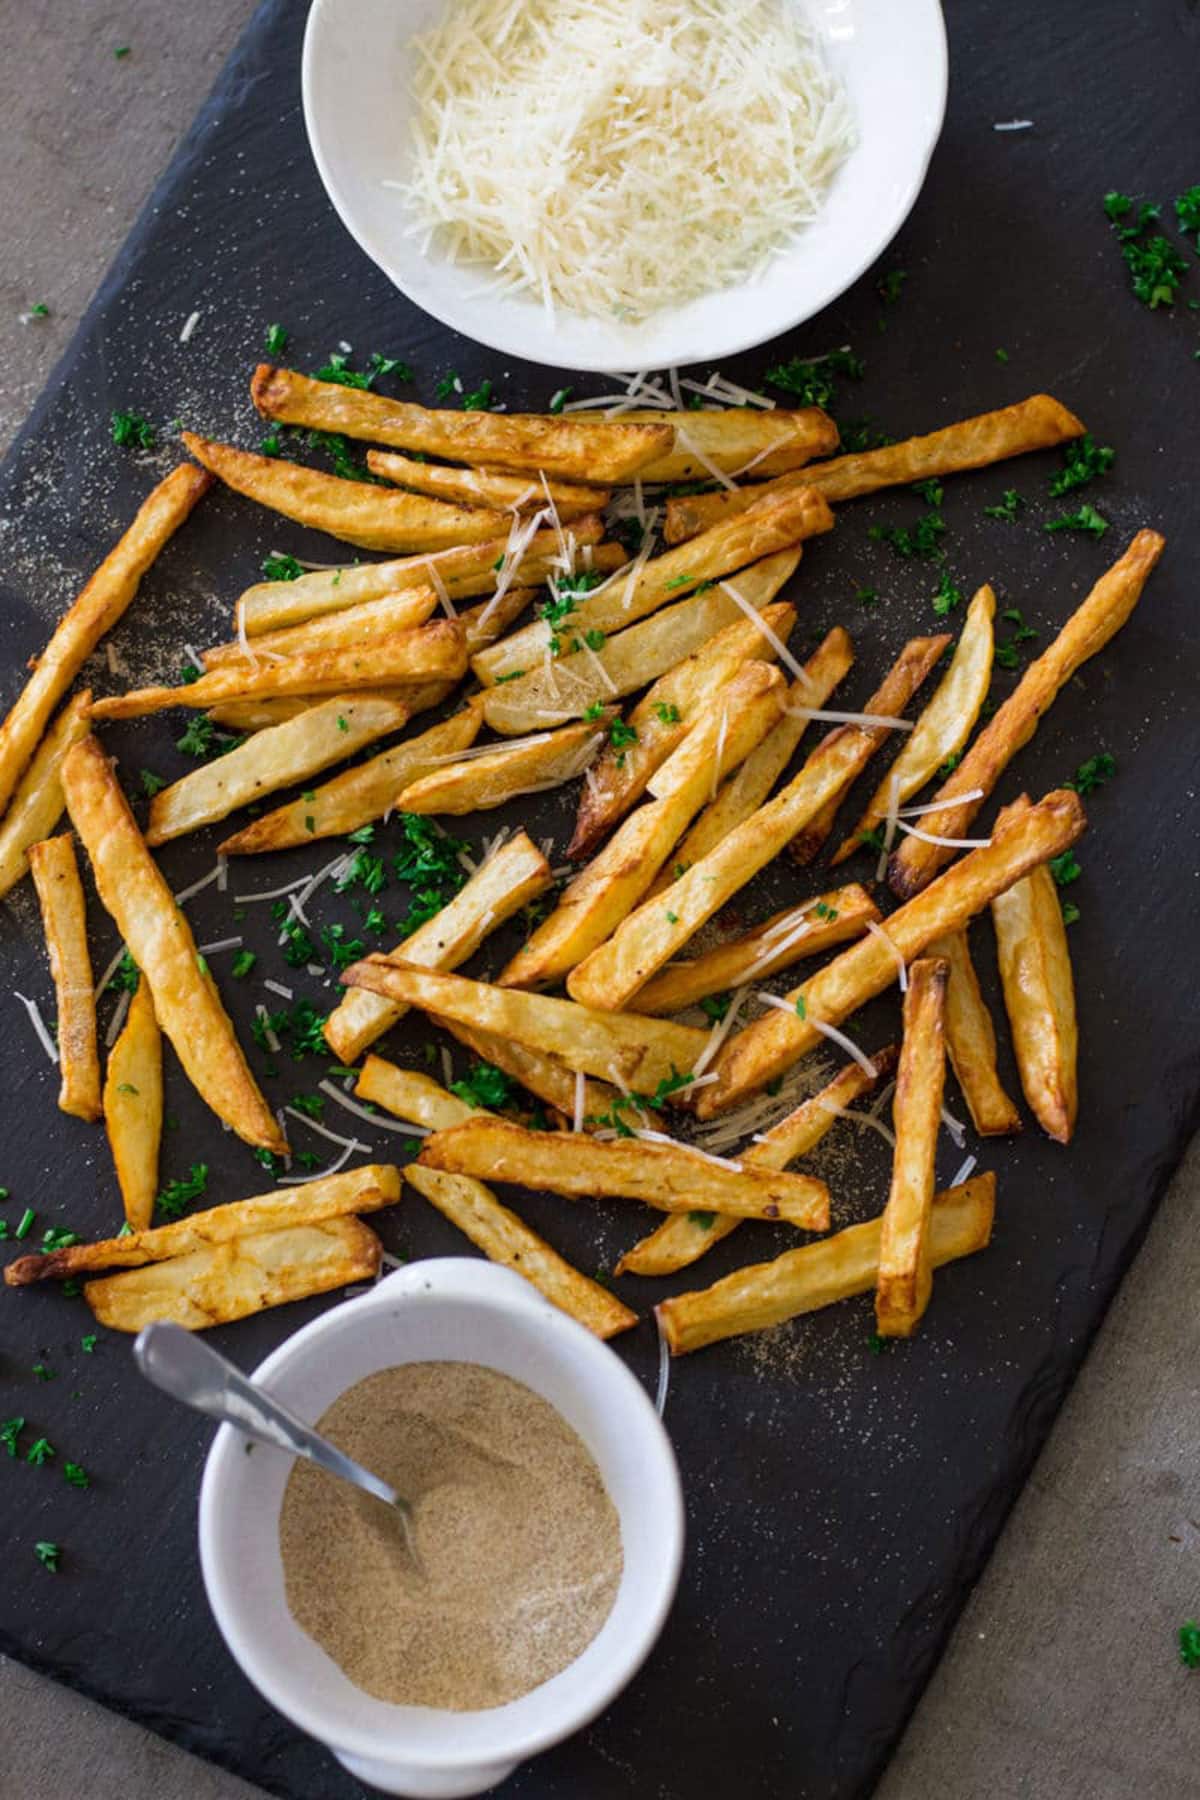 Black serving board containing air fryer french fries topped with Parmesan cheese and seasonings. 